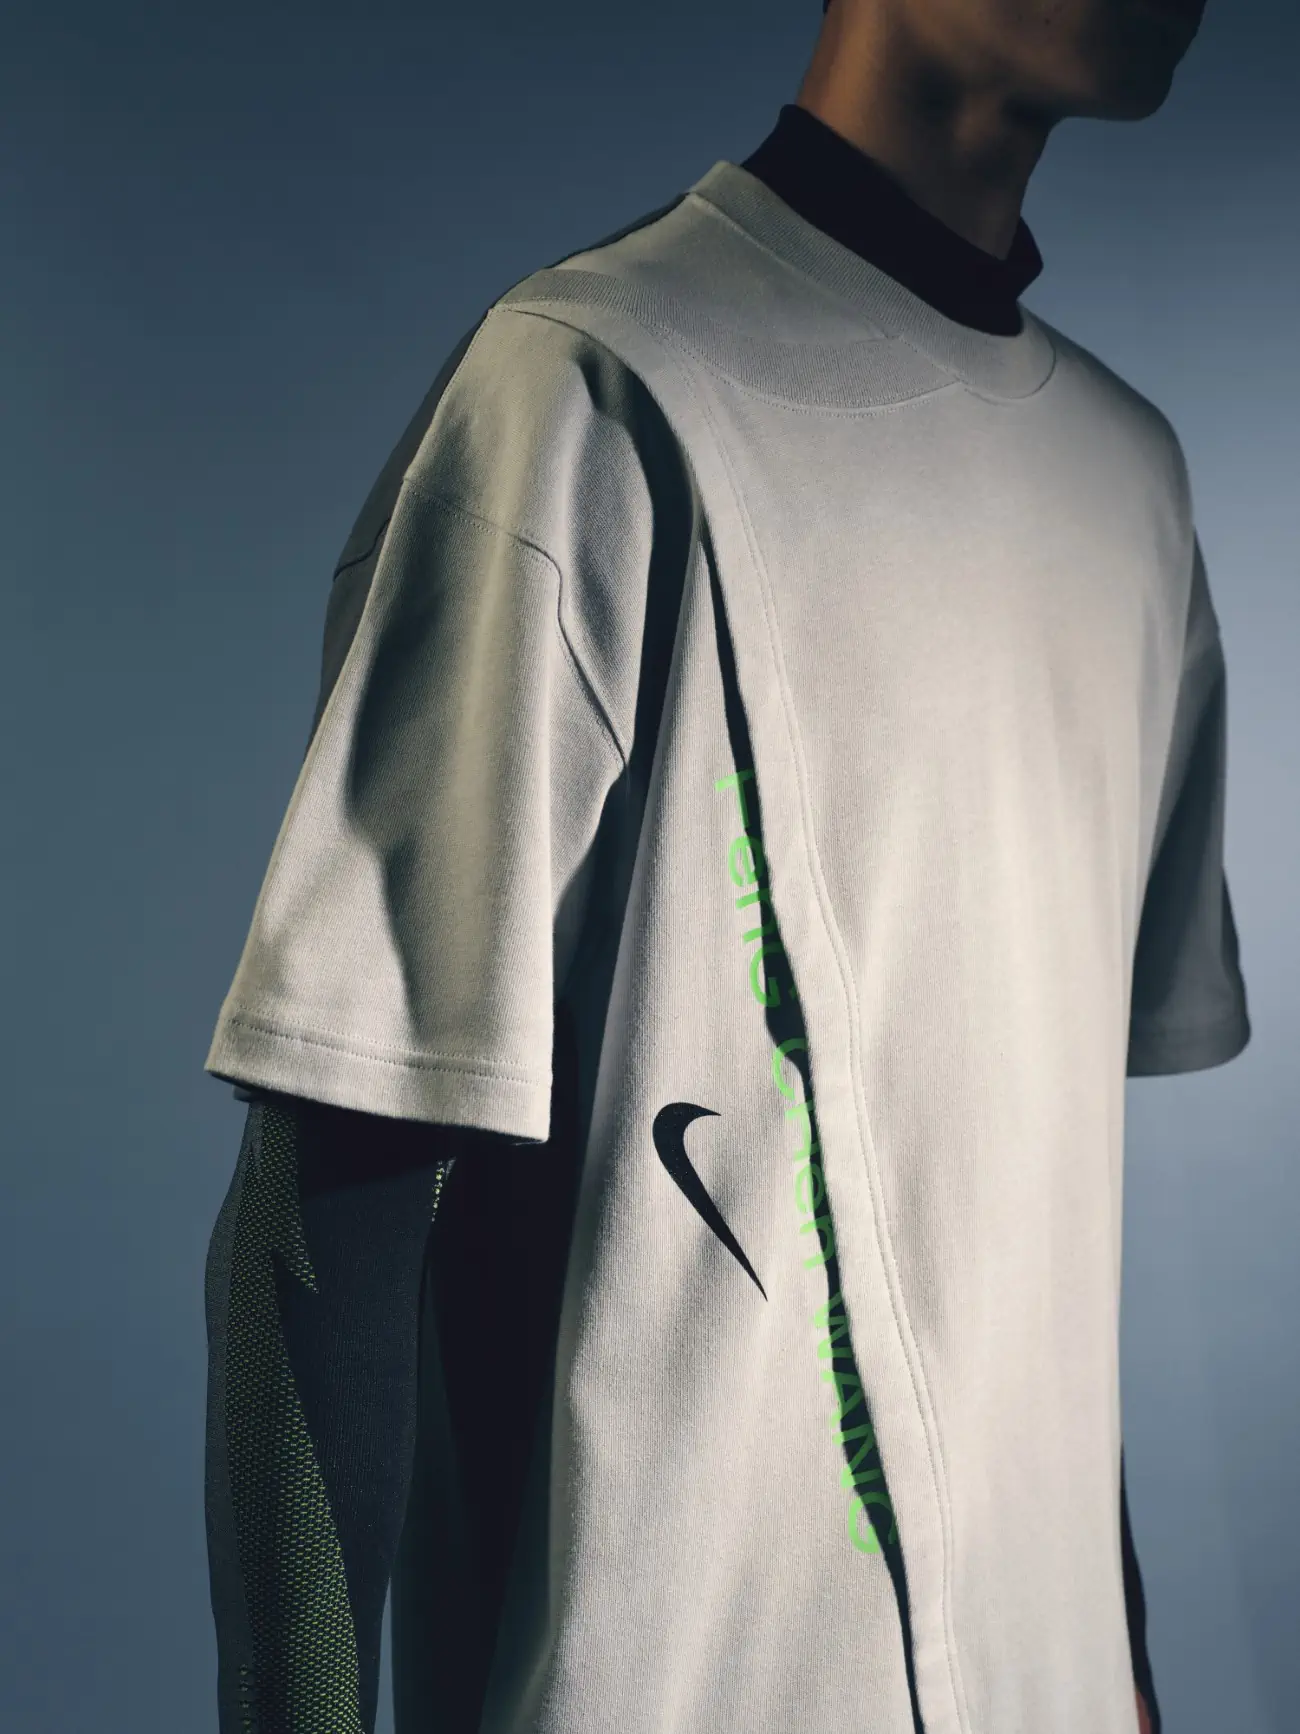 Breaking boundaries with the Nike x Feng Chen Wang collection